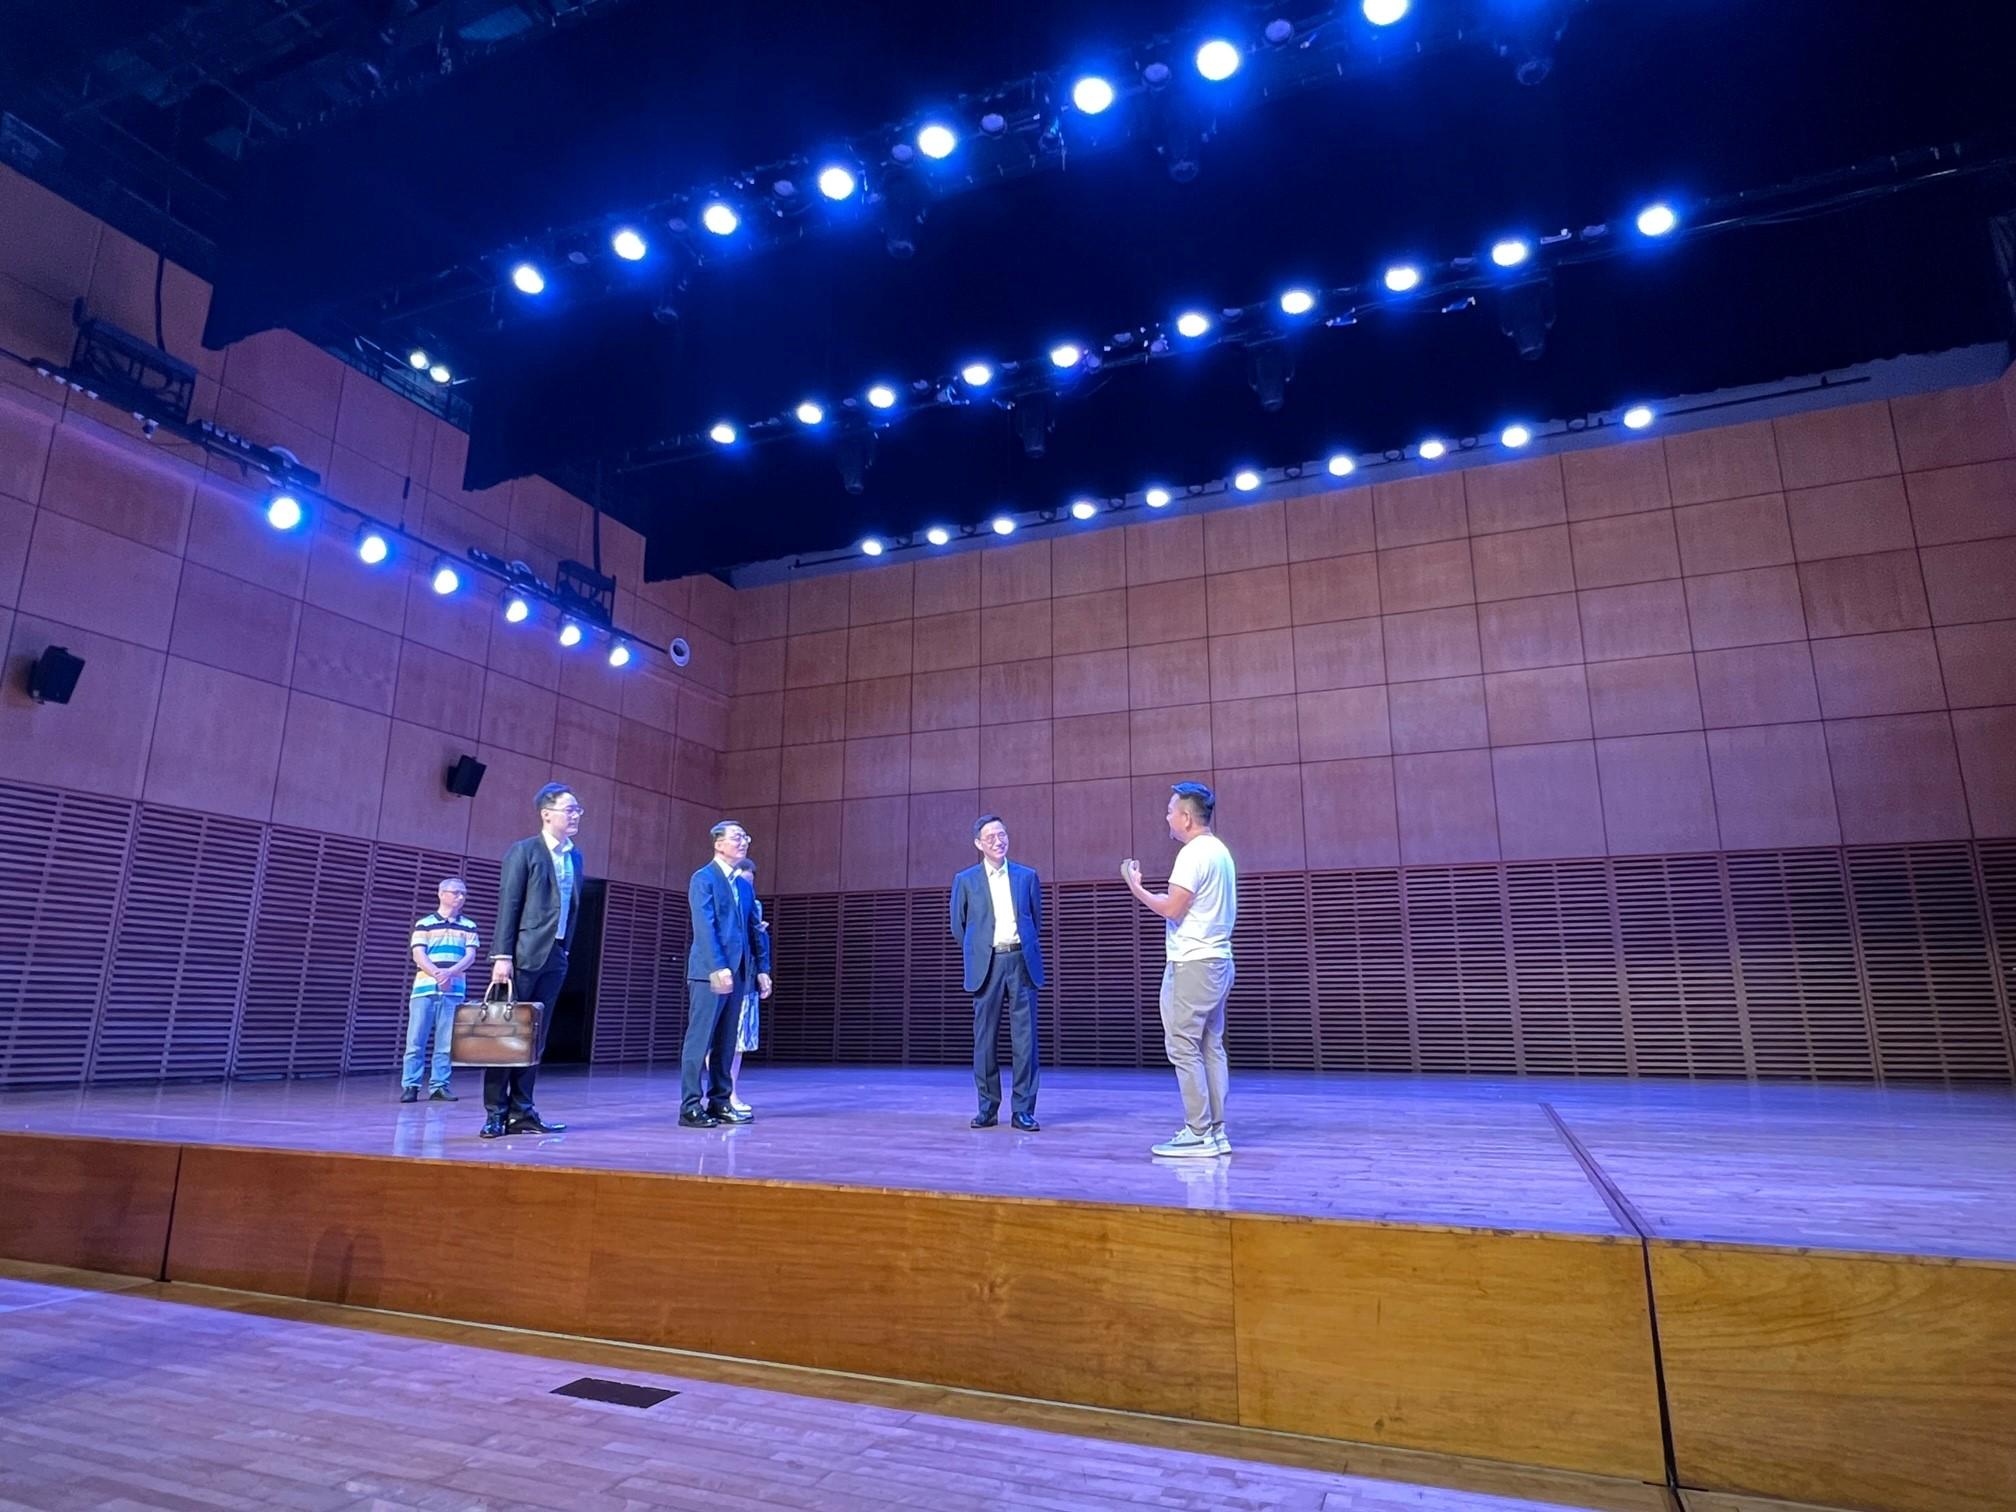 The Secretary for Culture, Sports and Tourism, Mr Kevin Yeung, yesterday (June 26) visited the Zhongshan Culture & Art Center. Photo shows Mr Yeung (second right) and the Director of Leisure and Cultural Services, Mr Vincent Liu, (third right) being briefed by a staff member on how the Center provides venues for performances of various art forms.